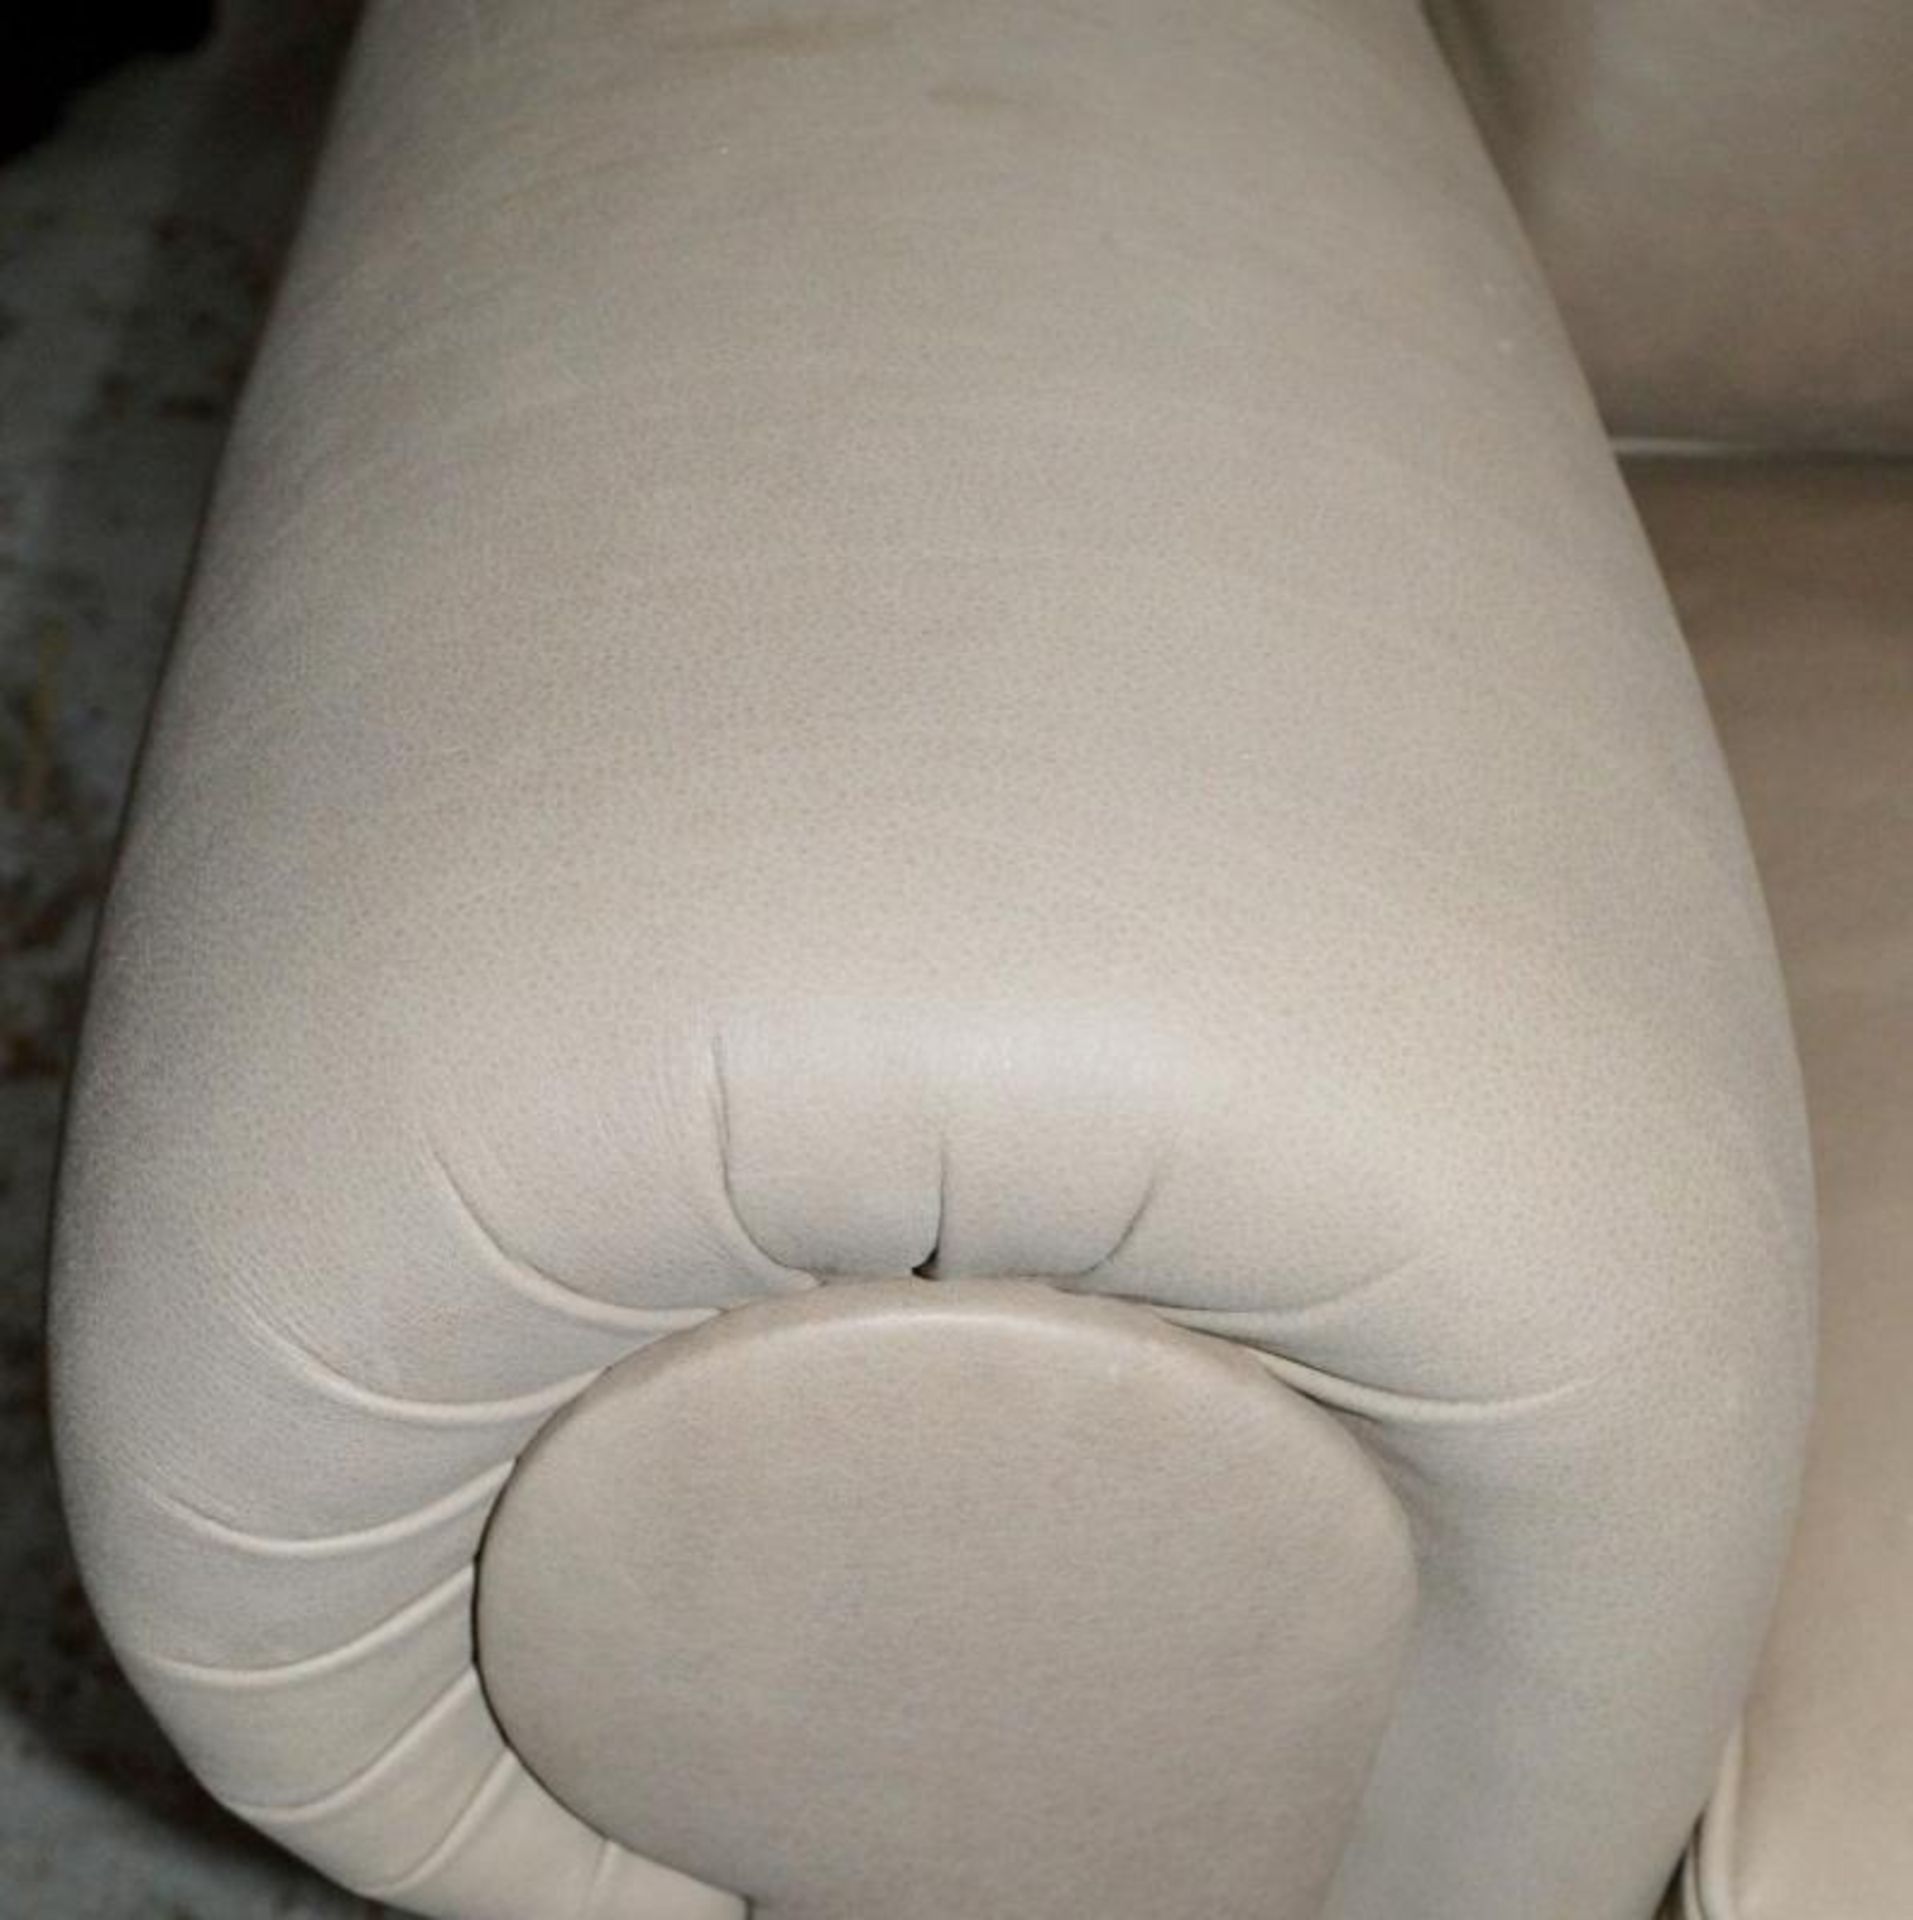 1 x ARTISTIC "Lauder Major" 3-Seater Sofa Upholstered In A Grey Leather - British Made Bespoke Piece - Image 2 of 4